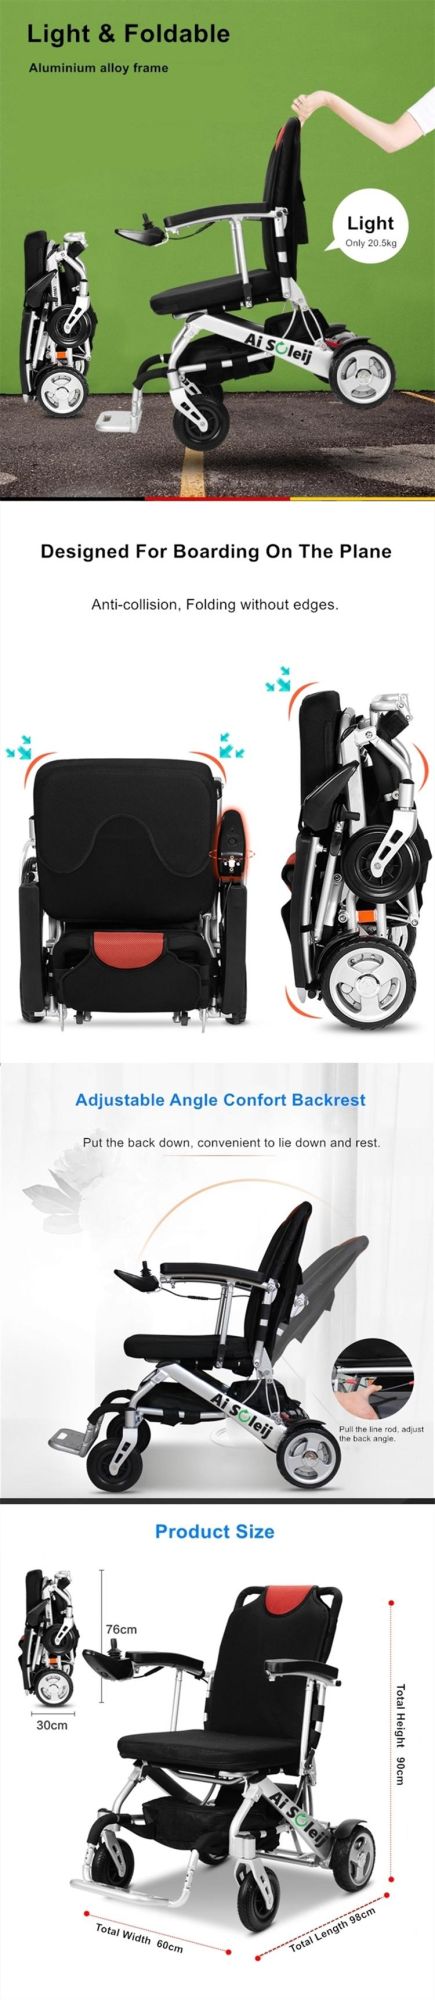 120kg Loading Folding Lightweight Electric Wheelchair with Orthopedic Legrests